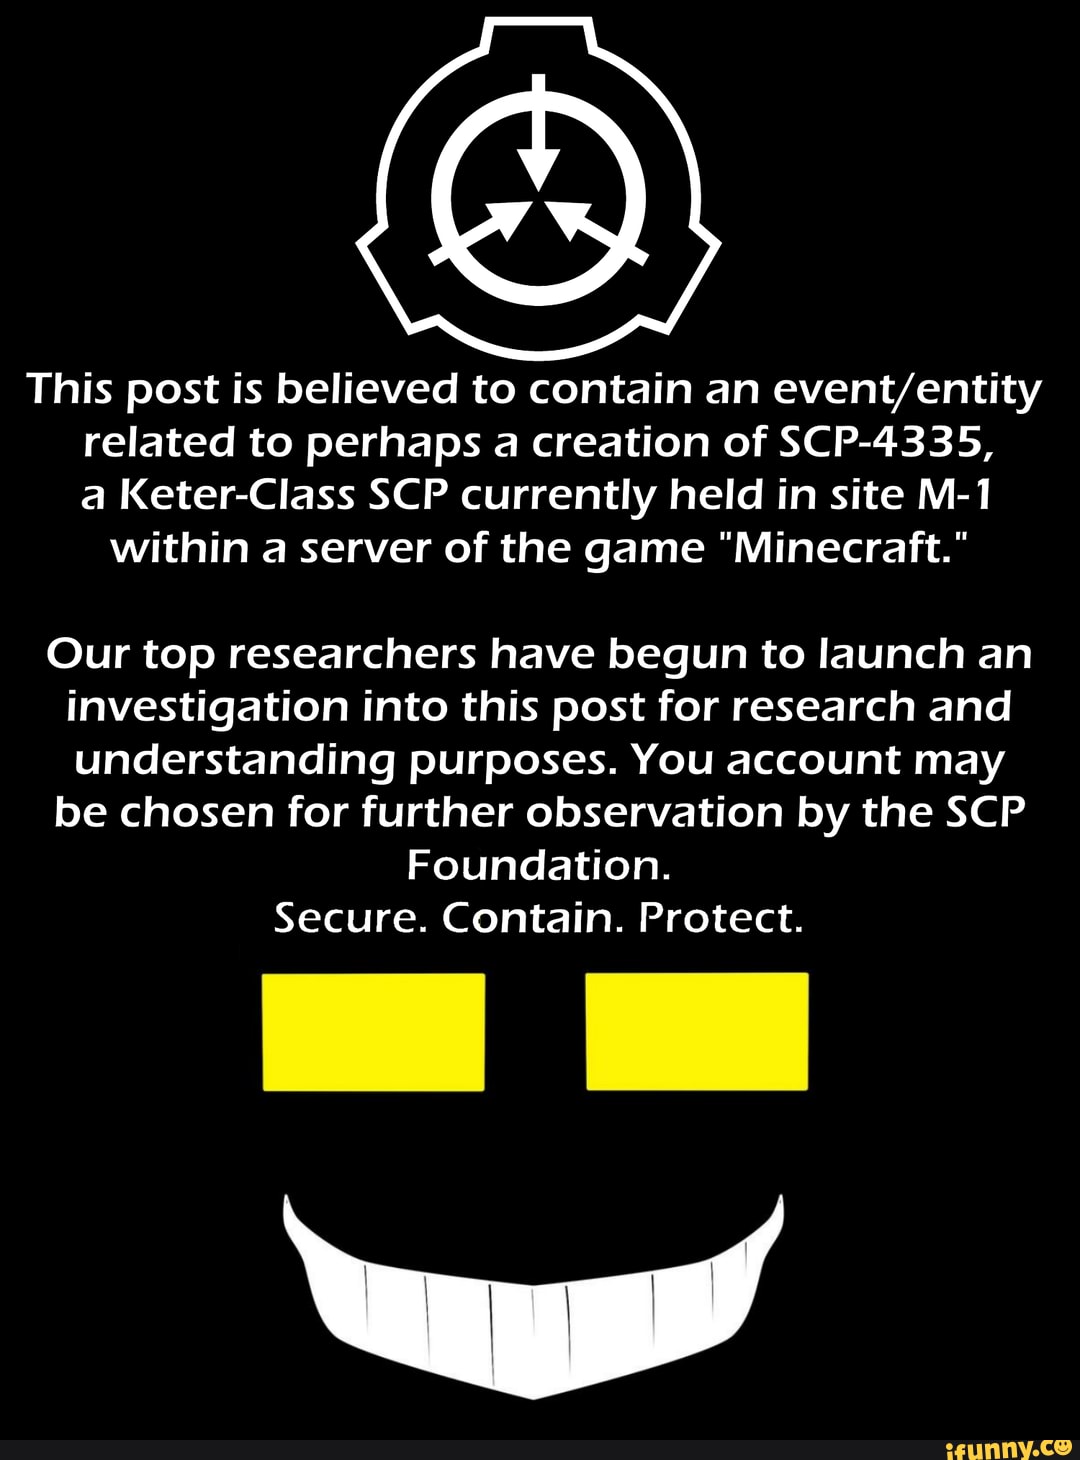 Scp 4335